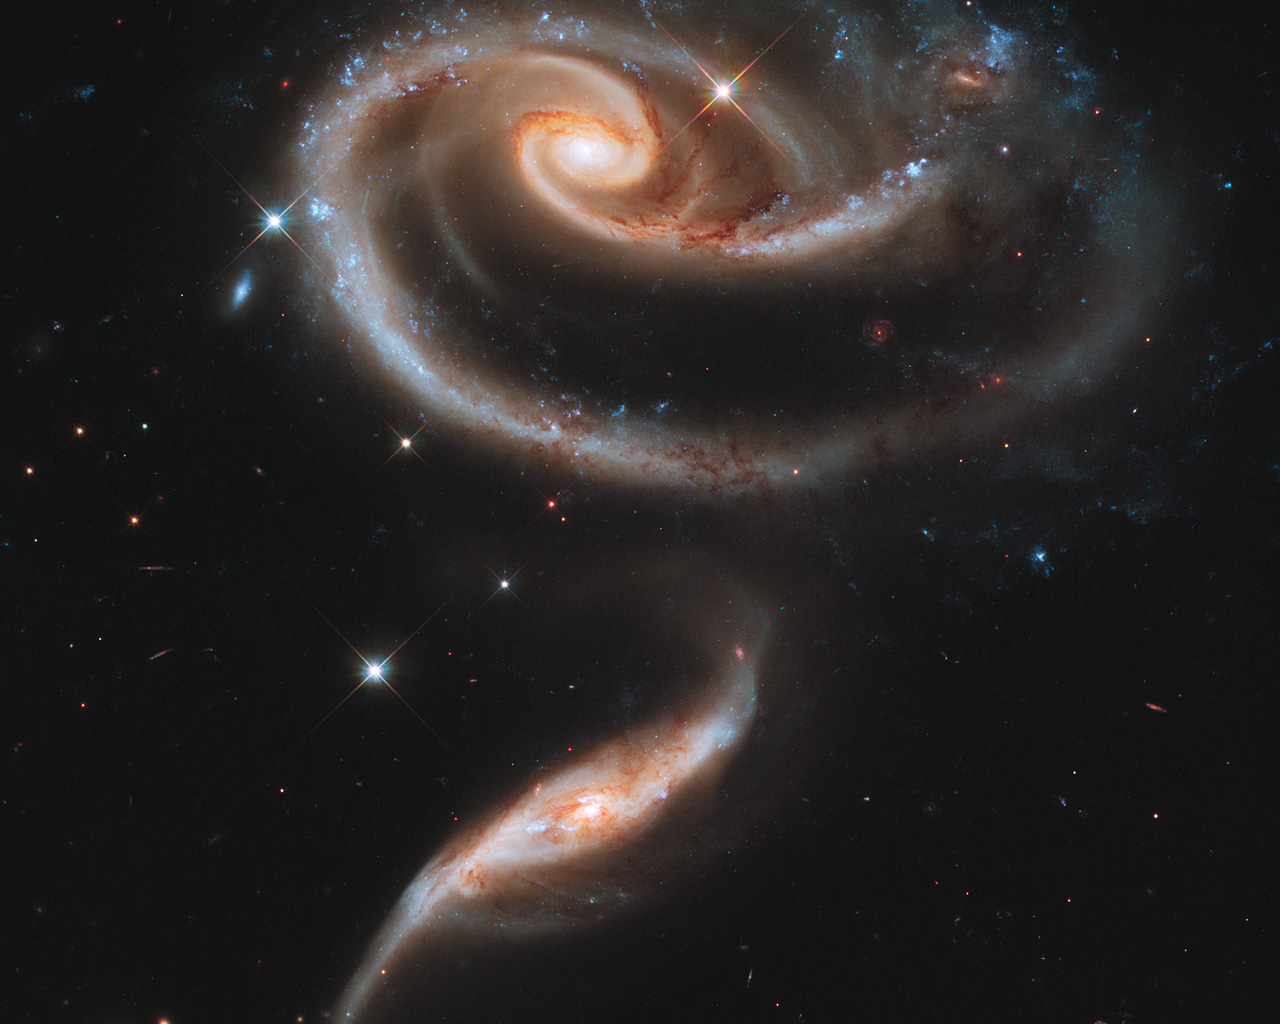 This image of a pair of interacting galaxies called Arp 273 was released to celebrate the 21st anniversary of the launch of the NASA/ESA Hubble Space Telescope.  The distorted shape of the larger of the two galaxies shows signs of tidal interactions with the smaller of the two. It is thought that the smaller galaxy has actually passed through the larger one.